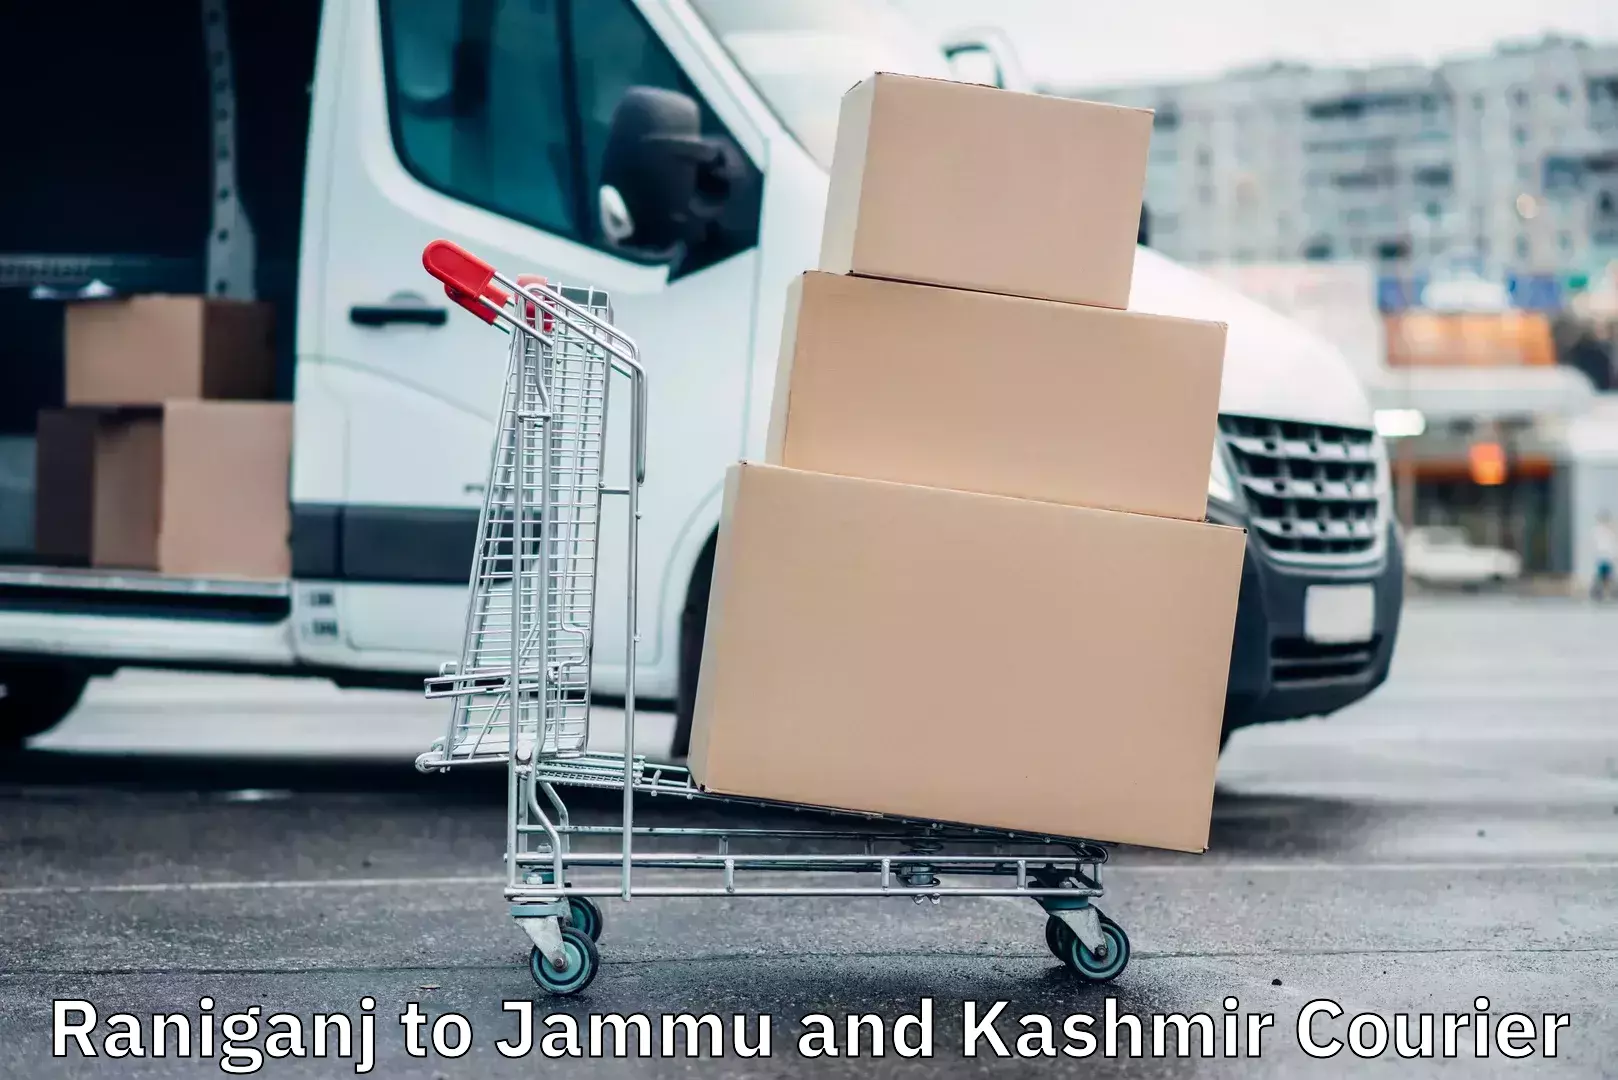 Express package services in Raniganj to Jammu and Kashmir